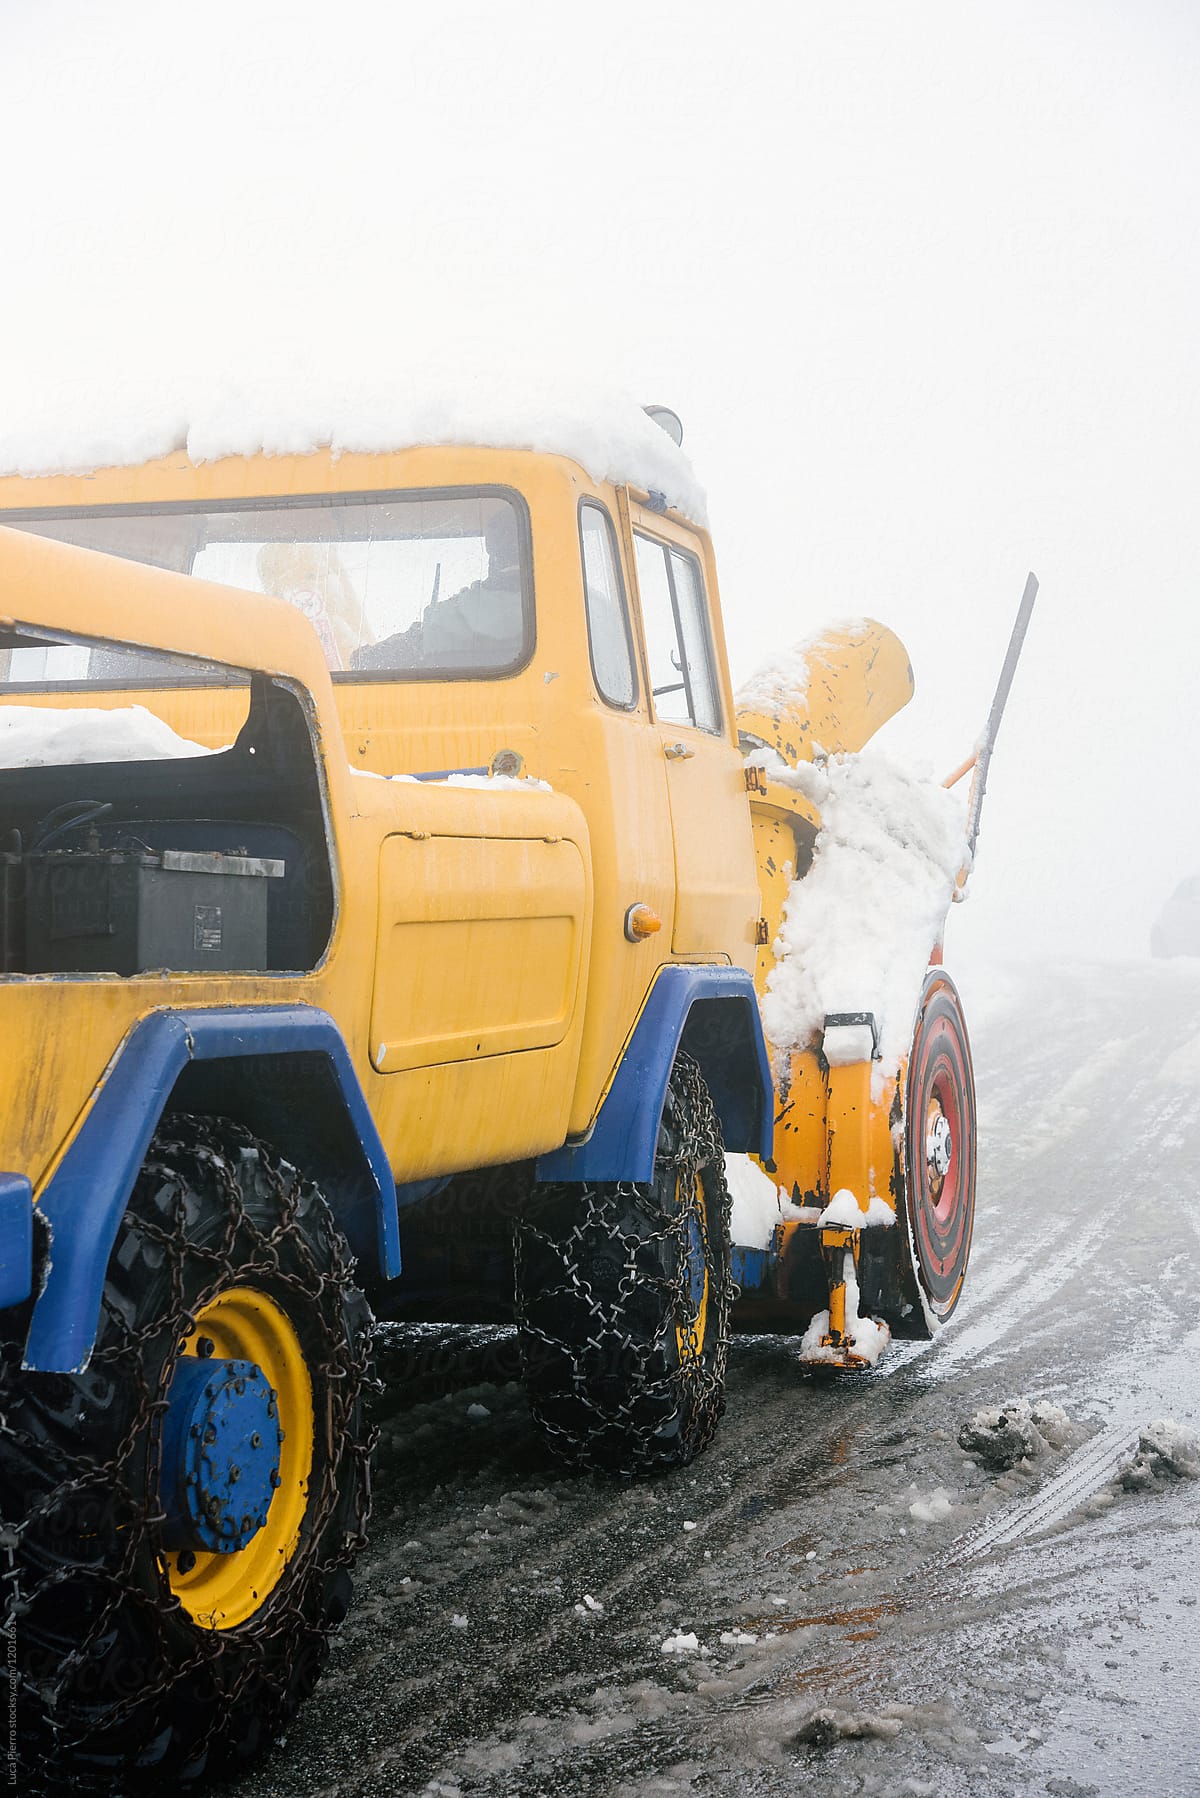 A snow plow  tractor clearing the snow on the roads from a winter storm